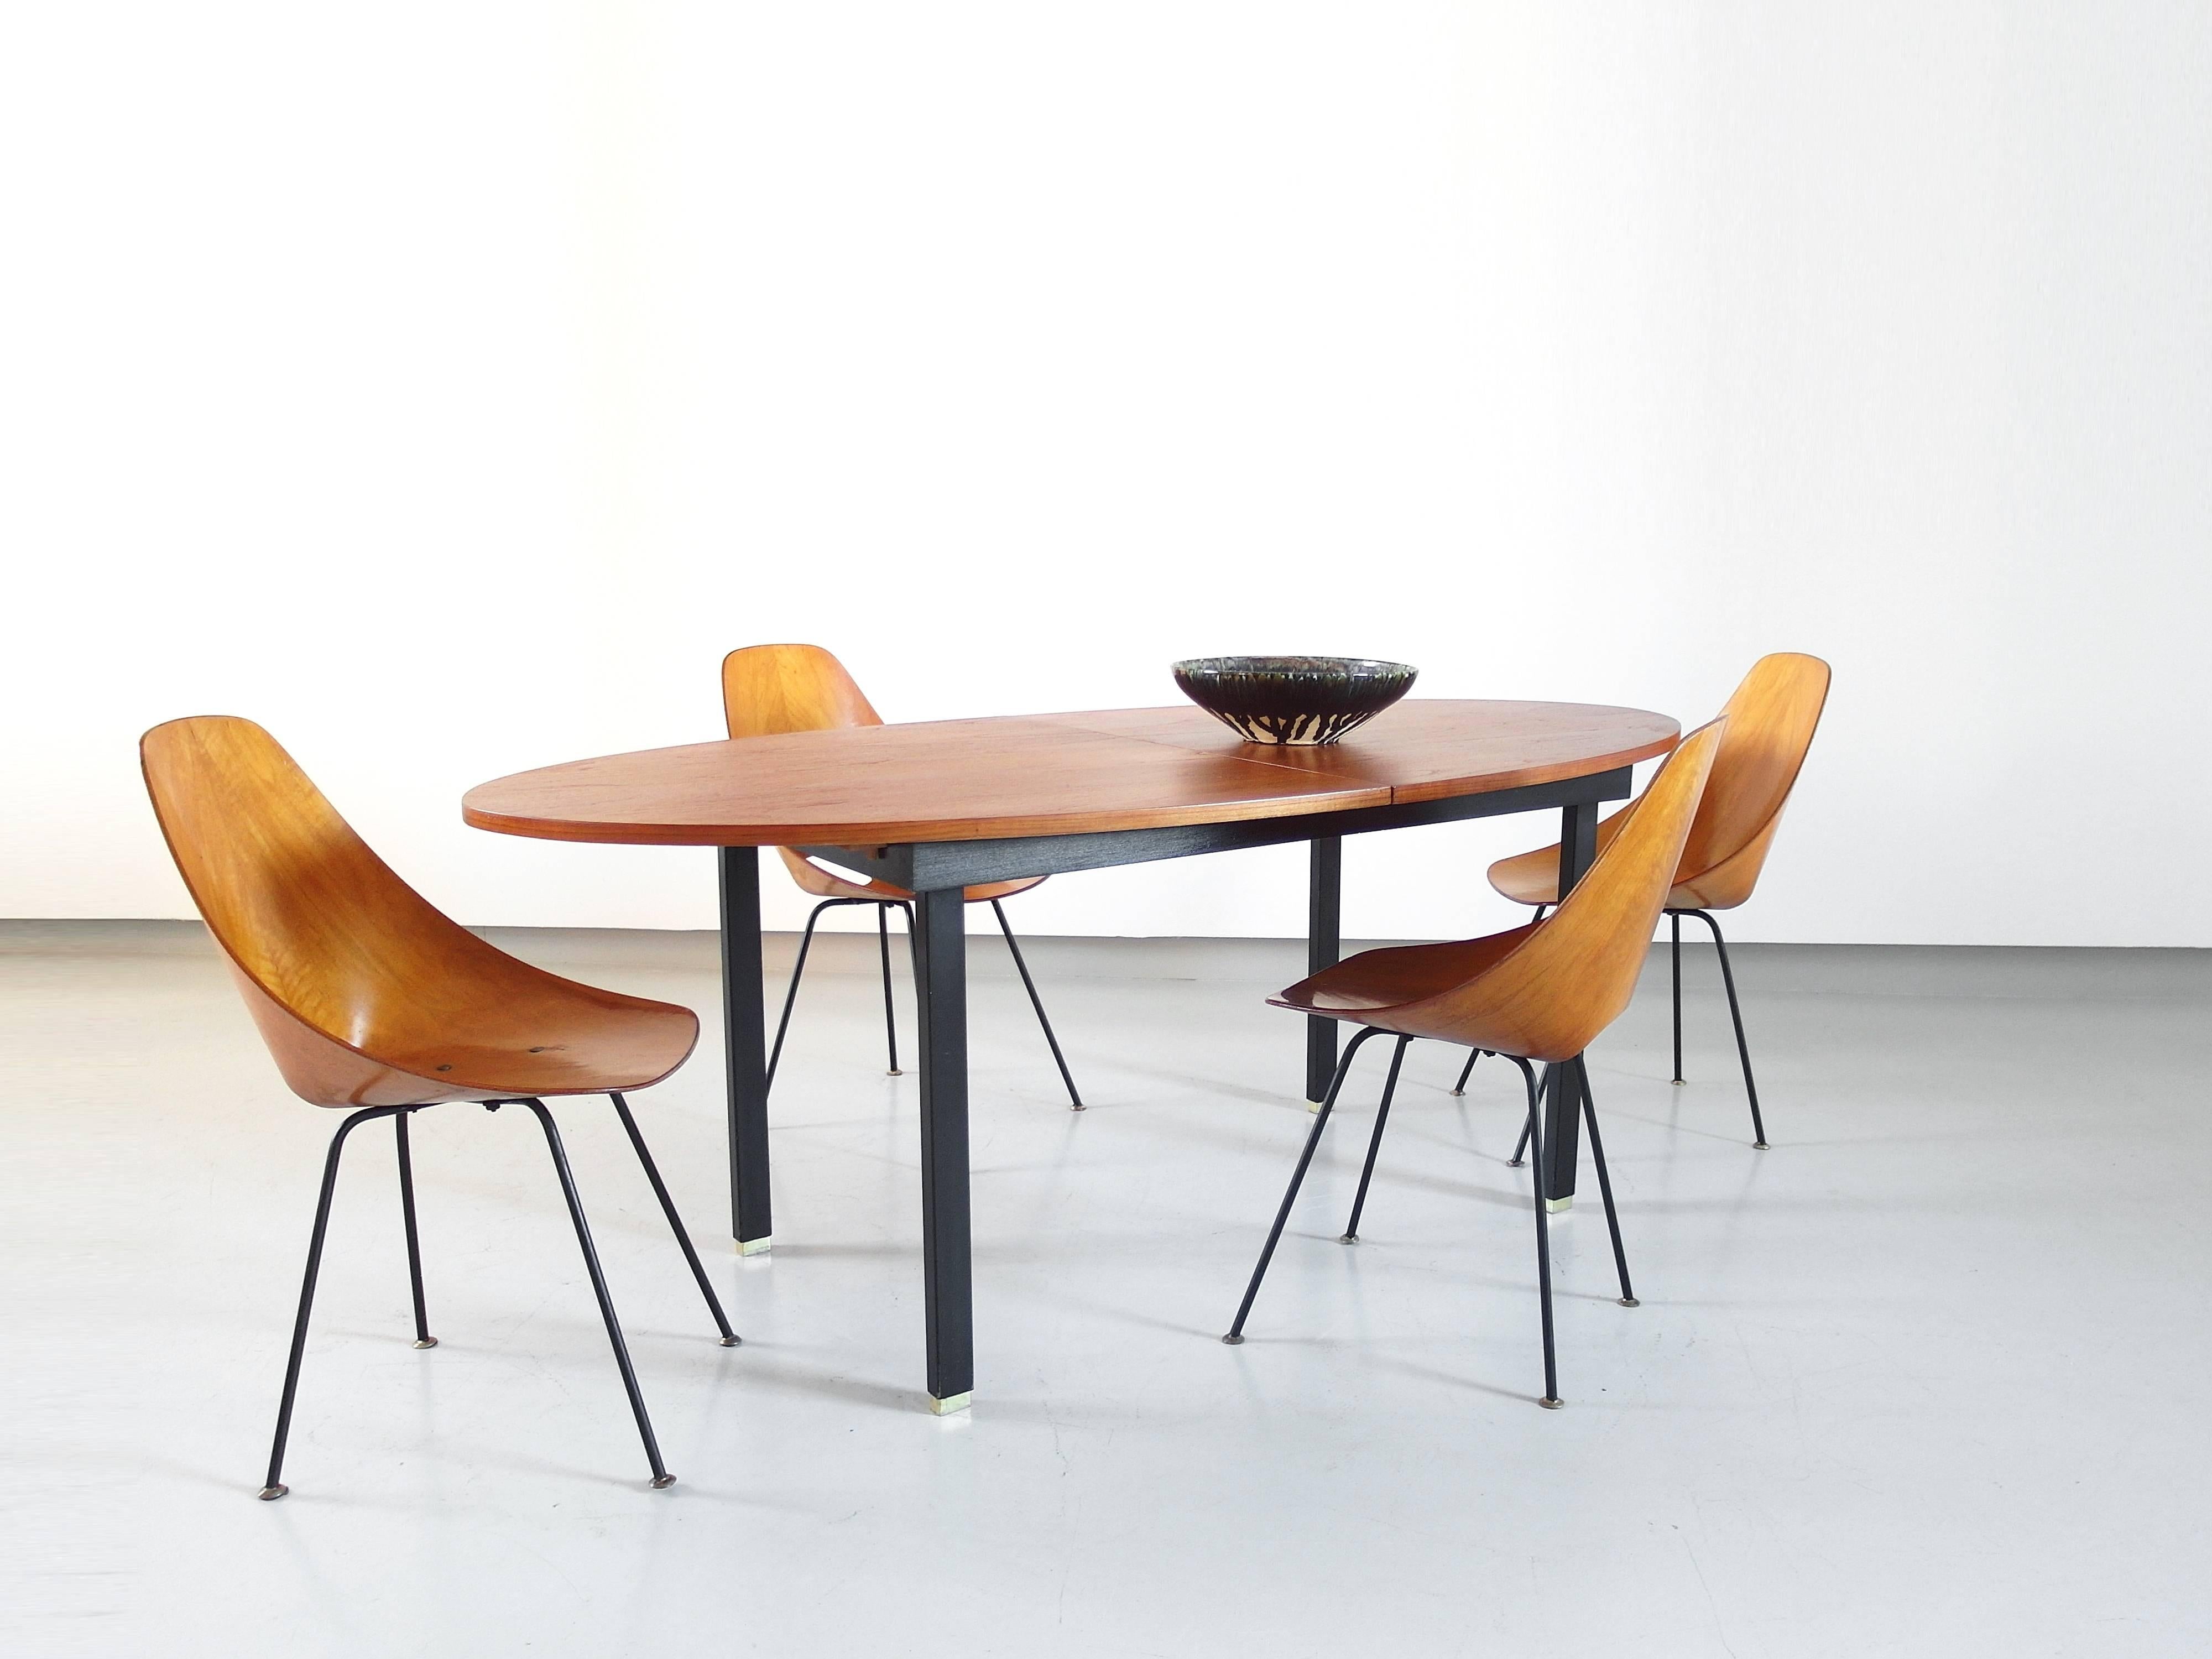 Refined oval dining table with a teak veneer extendable tabletop, Belgium, 1960s.
The tabletop sits on a black wooden frame and has black metal square tubular legs. The table extends from 195 cm to 240 cm. The refined brass feet are extendable as